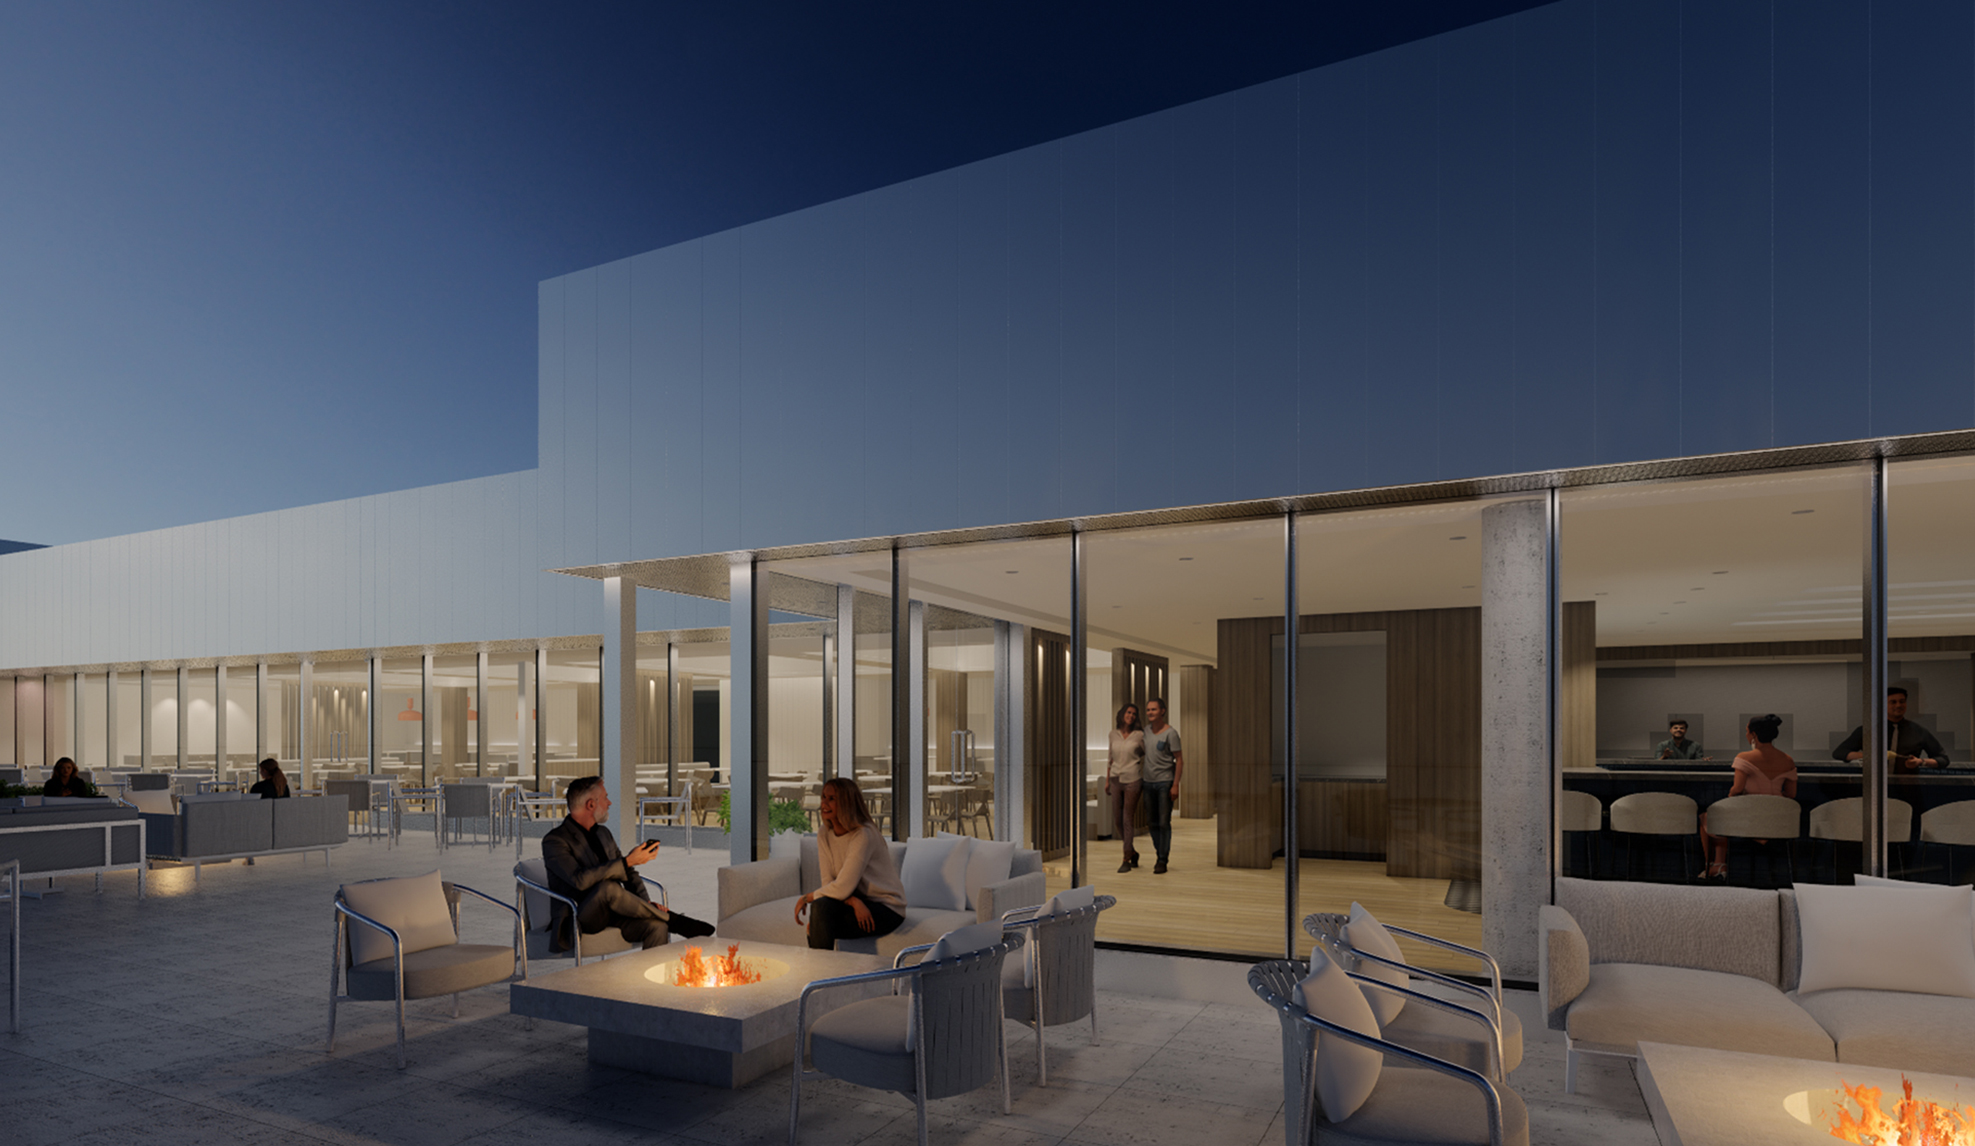 Nighttime rendering of the outdoor seating area with lit gas fire pits at the Hollyburn Country Club.